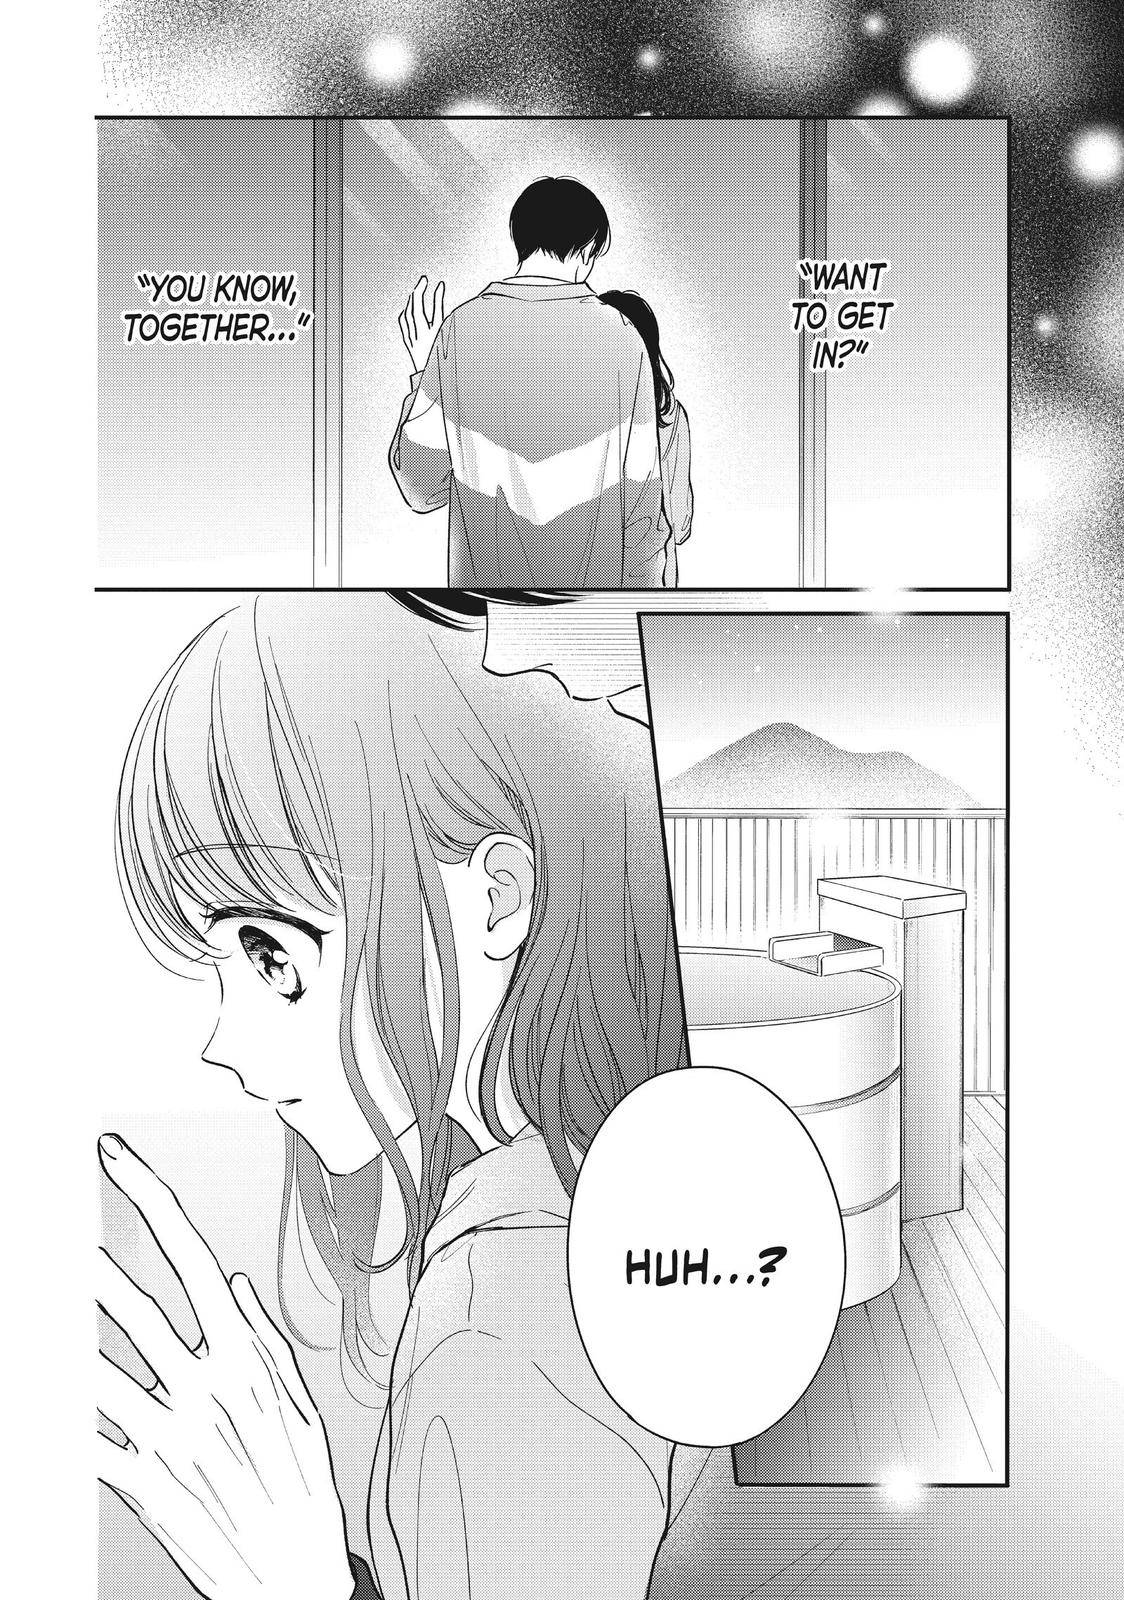 Chihiro-kun Only Has Eyes for Me - chapter 23 - #2